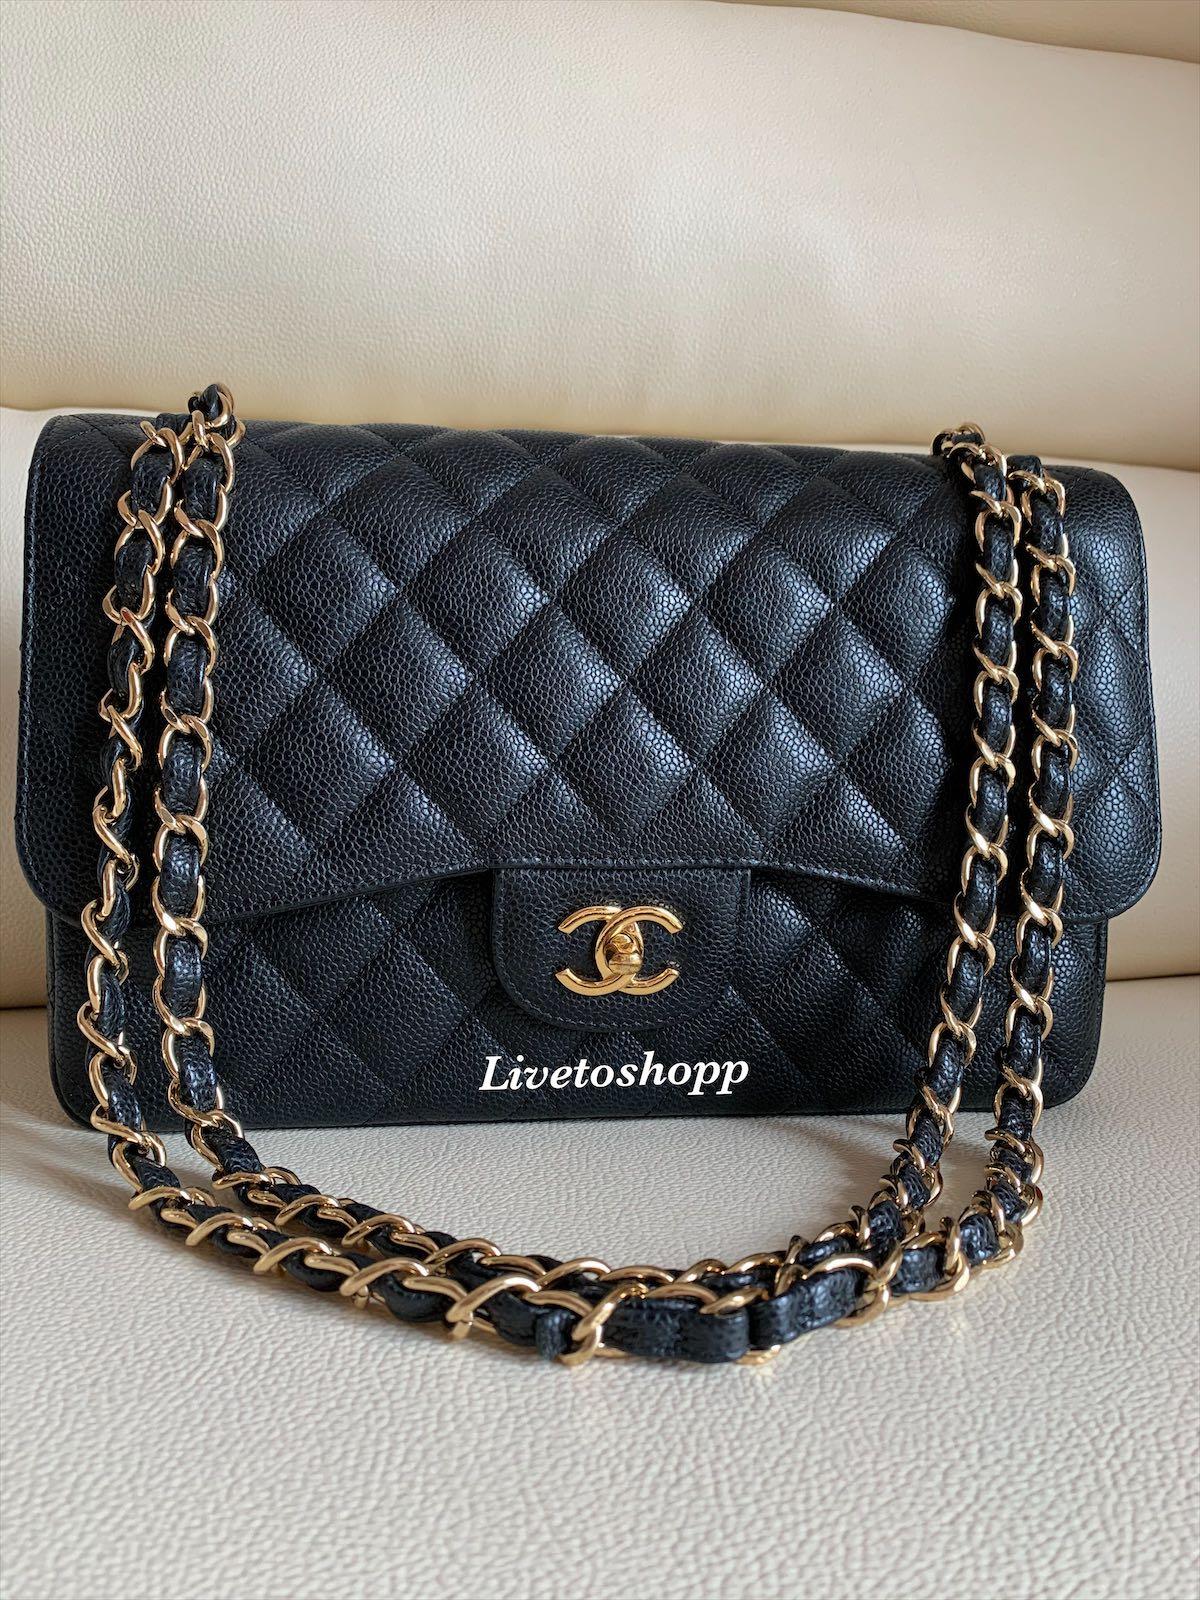 Chanel Beige Caviar Leather Classic Jumbo Double Flap GHW – On Que Style